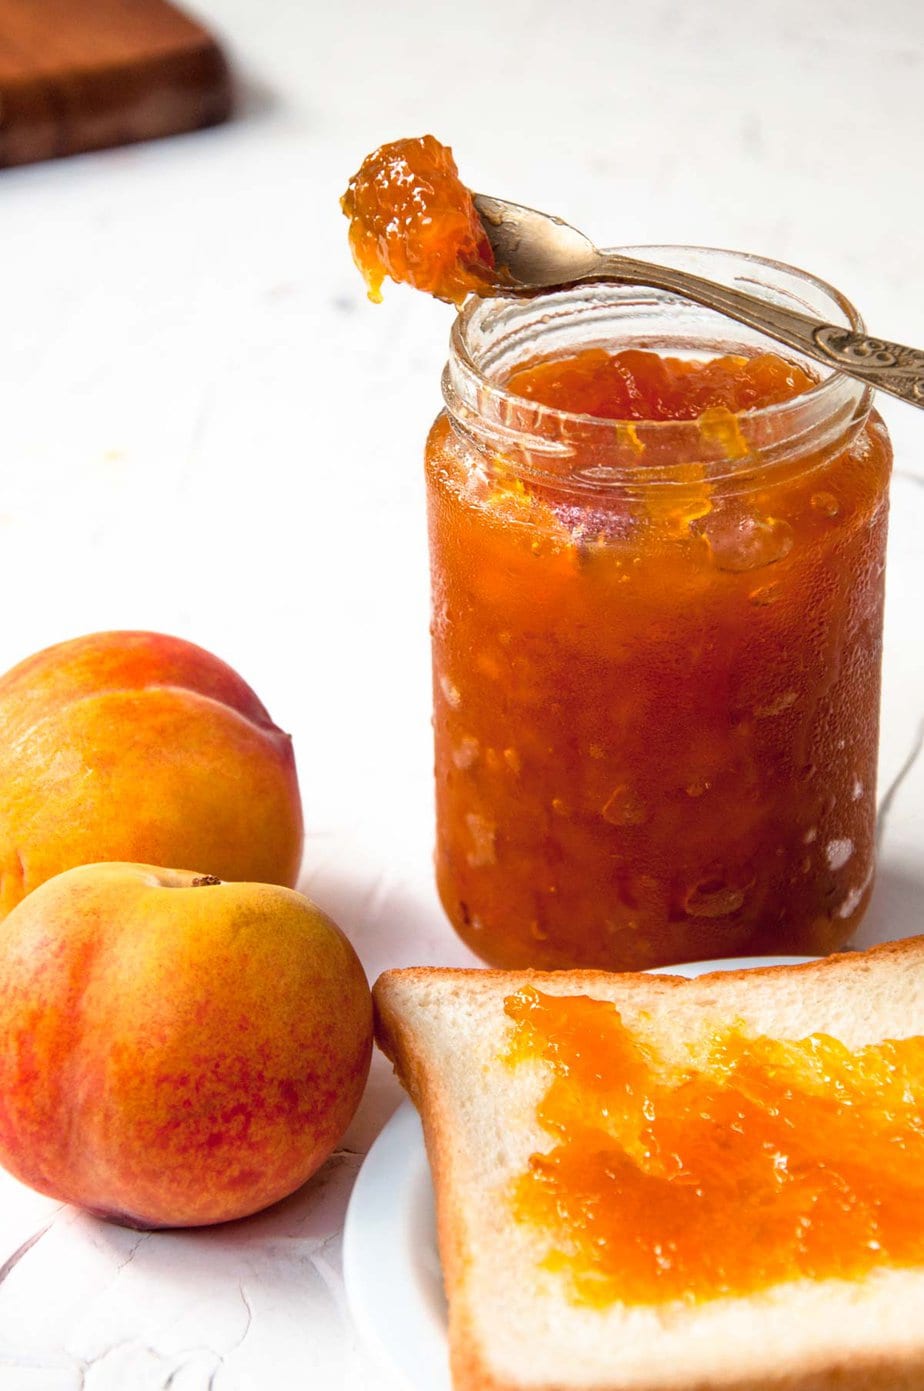 A shot of jam jar, toast and peaches.